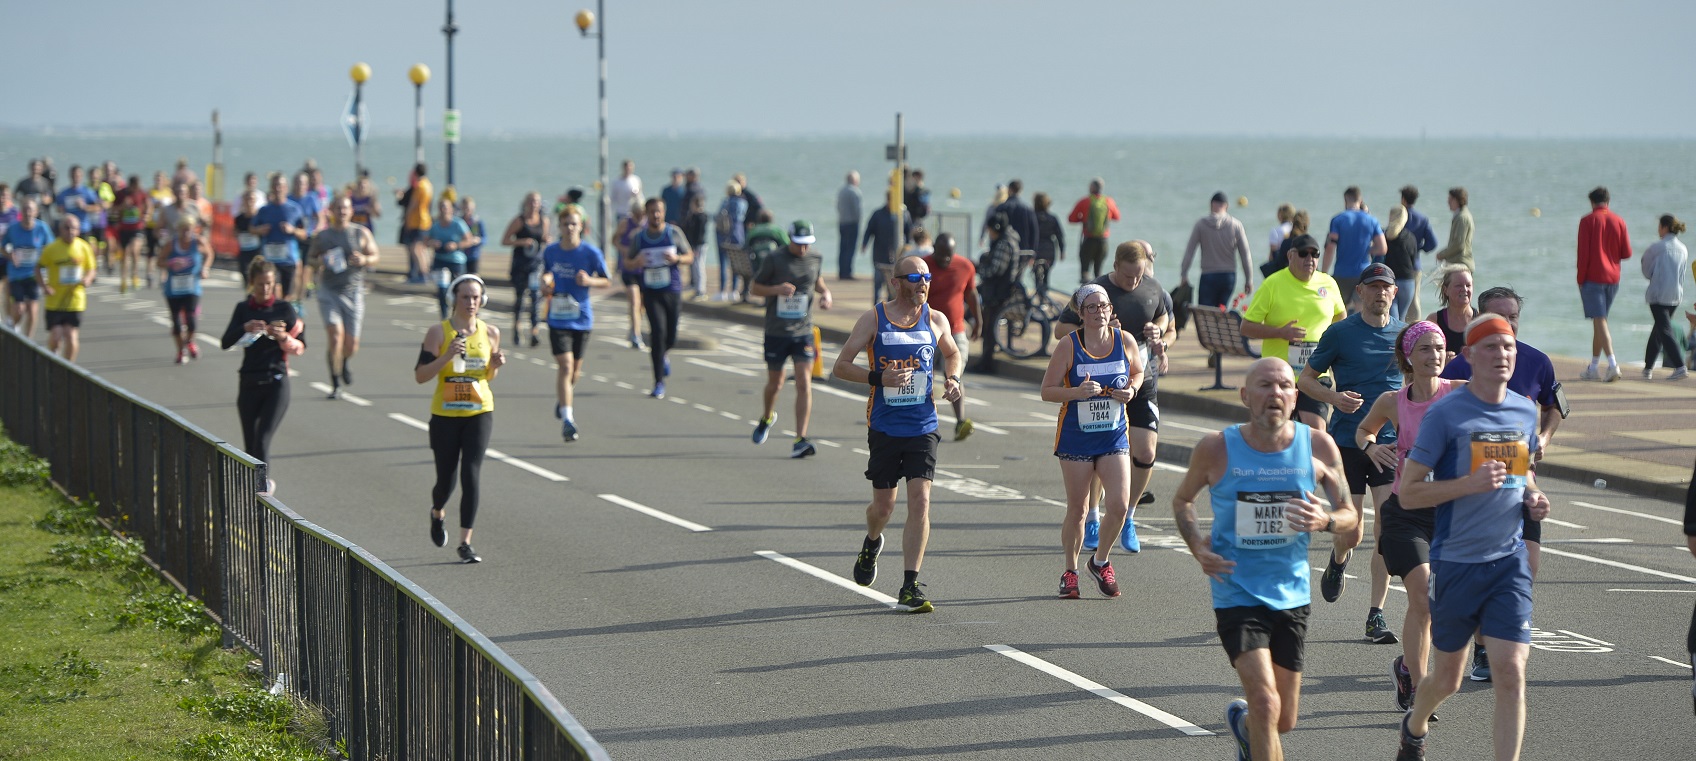 What's new at this year's Great South Run? Great Run